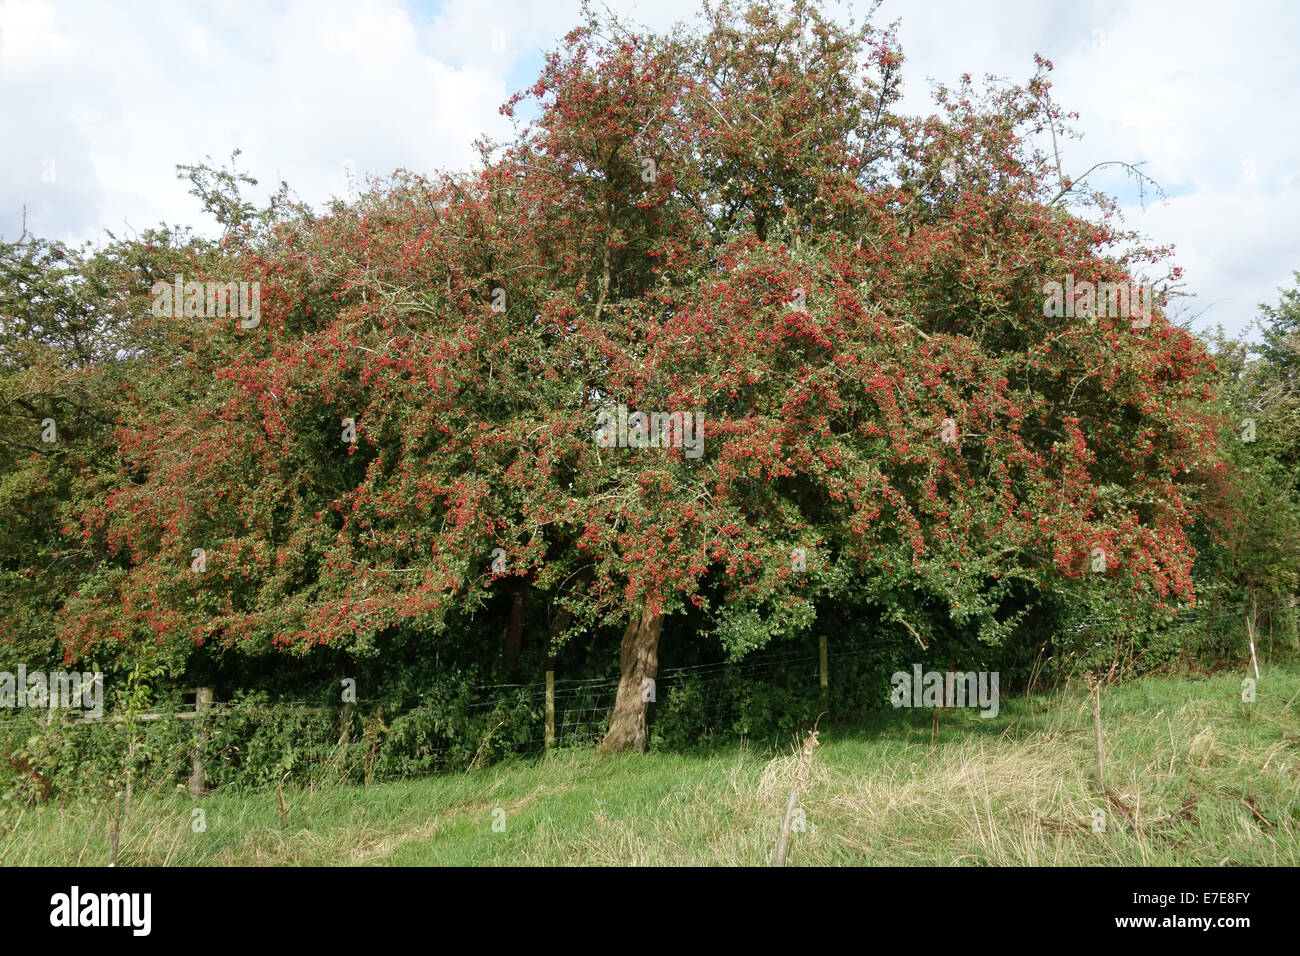 Hawthorn, quickthorn or May tree, Crataegus monogyna with plentiful ripe red berries in late summer Stock Photo